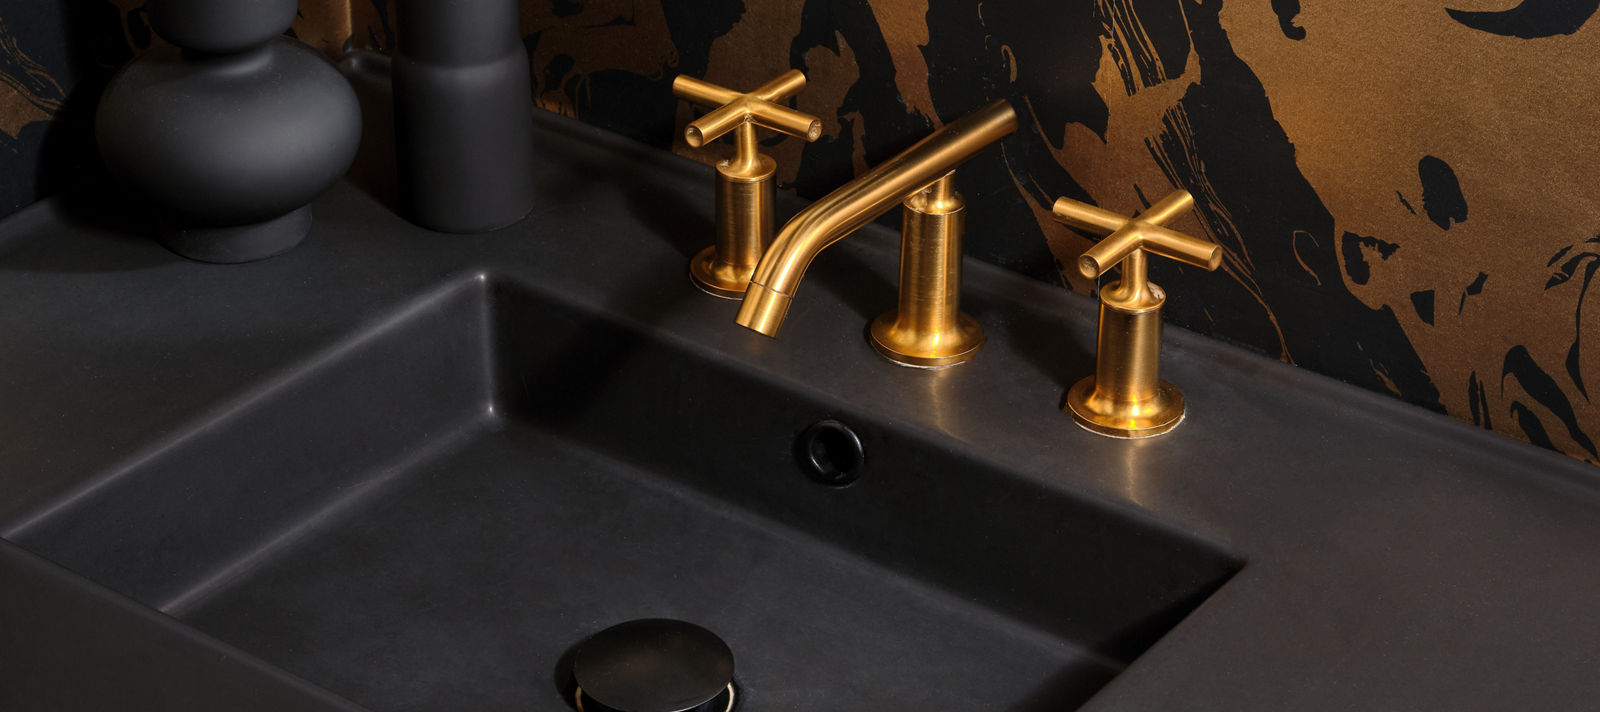 <p>The Purist® faucet in Vibrant Brushed Moderne Brass adds a warm, luxurious touch.</p>